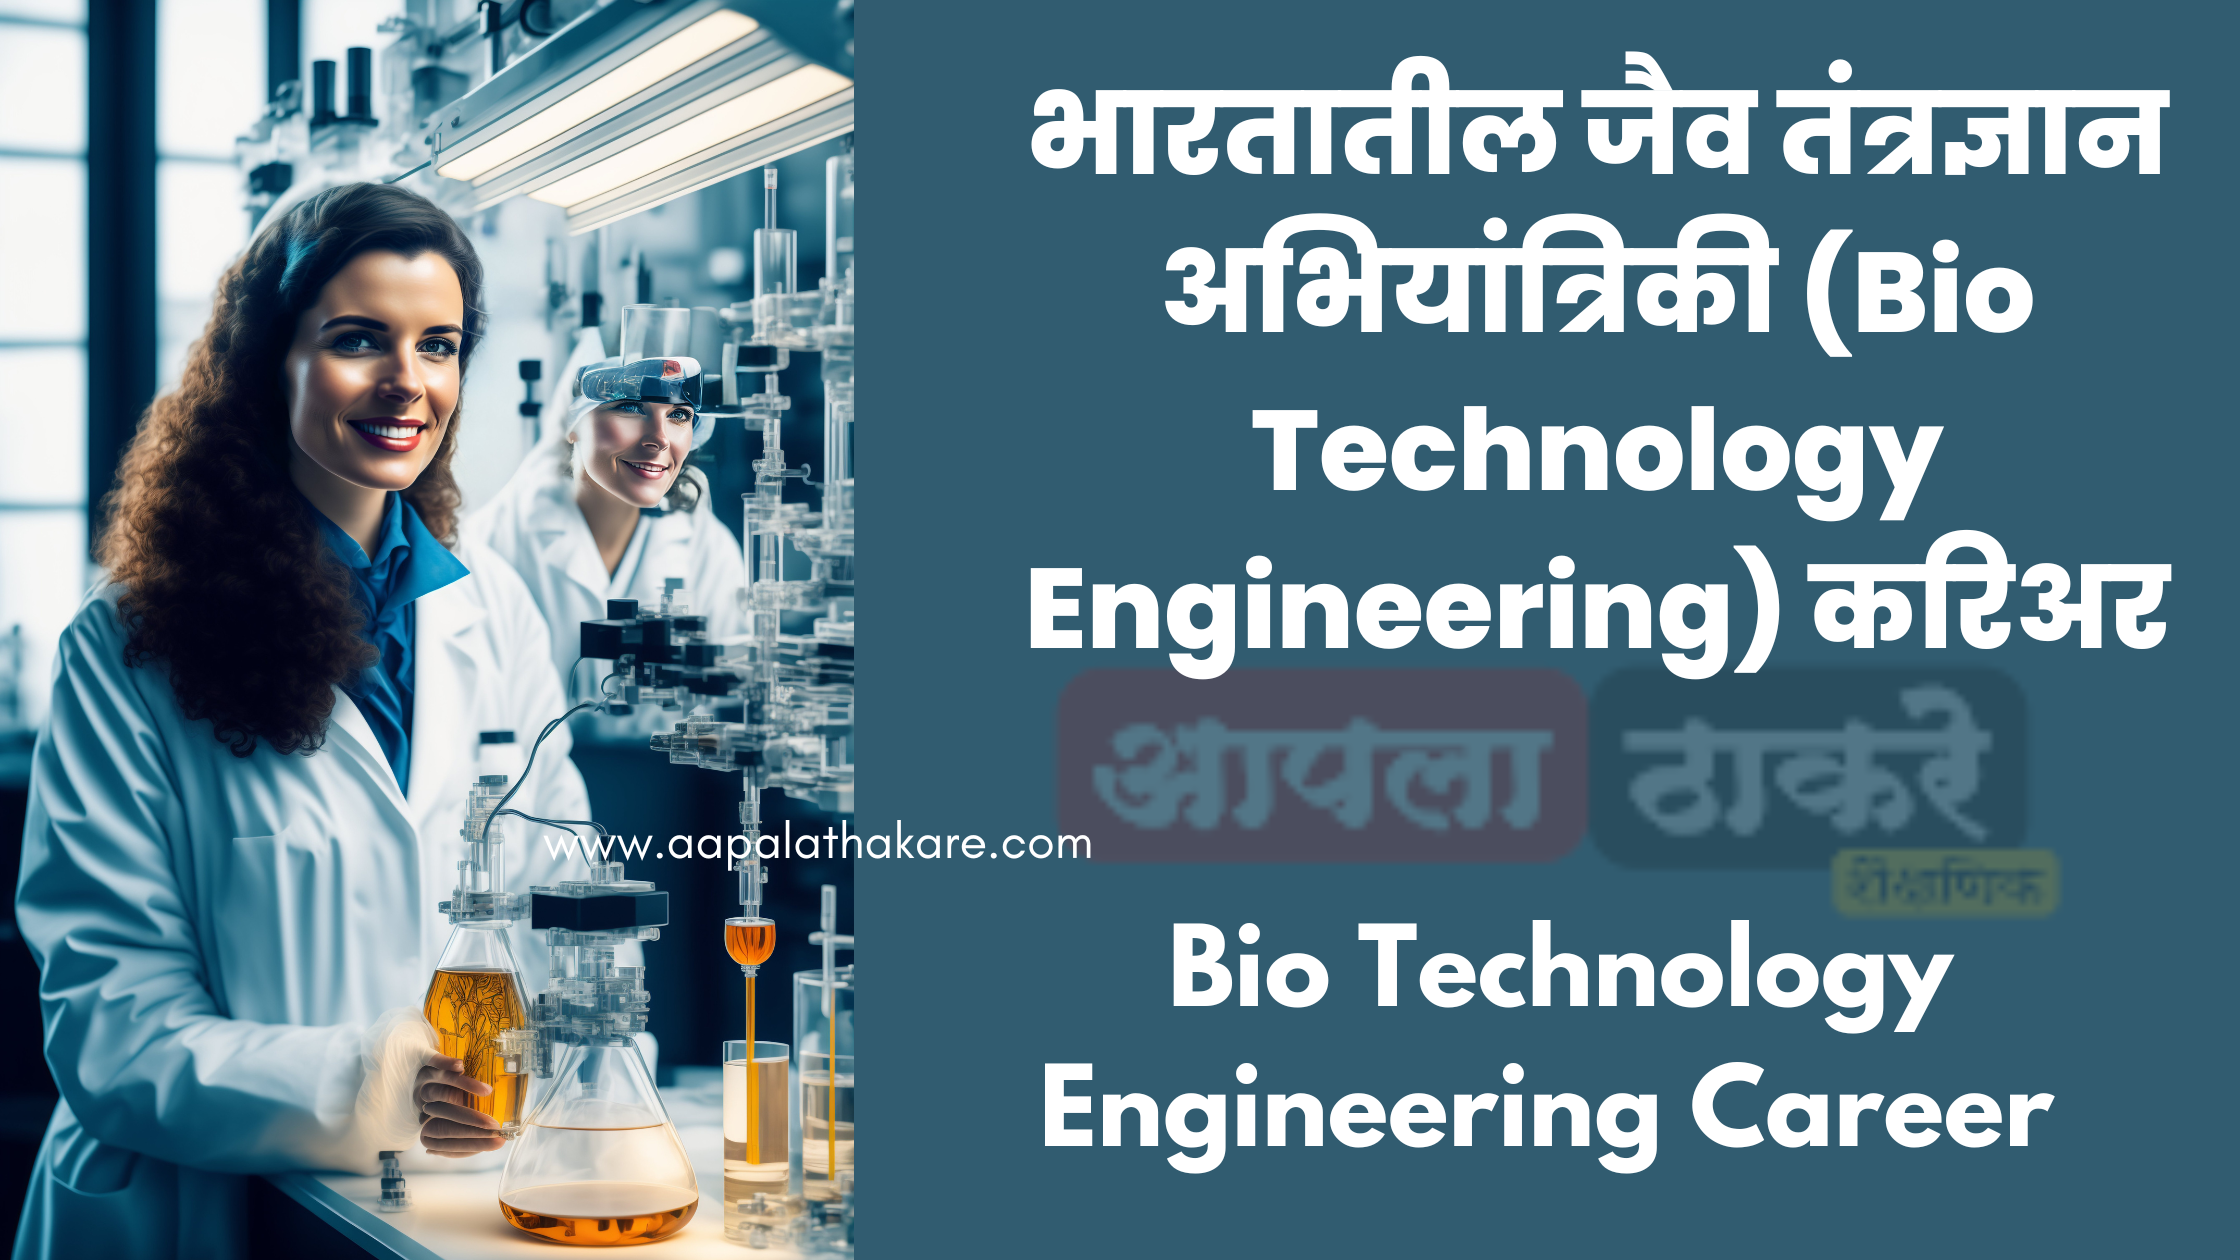 biotechnology engineering jobs in india,biomedical engineering jobs in india,biomedical engineering jobs in indian army,biomedical engineering jobs in indiana,biotechnology engineering jobs salary in india,biotechnology engineering job opportunities in india,biomedical engineering career in india,biomedical engineering opportunities in india,biomedical engineering work in india,biomedical engineering jobs salary in india